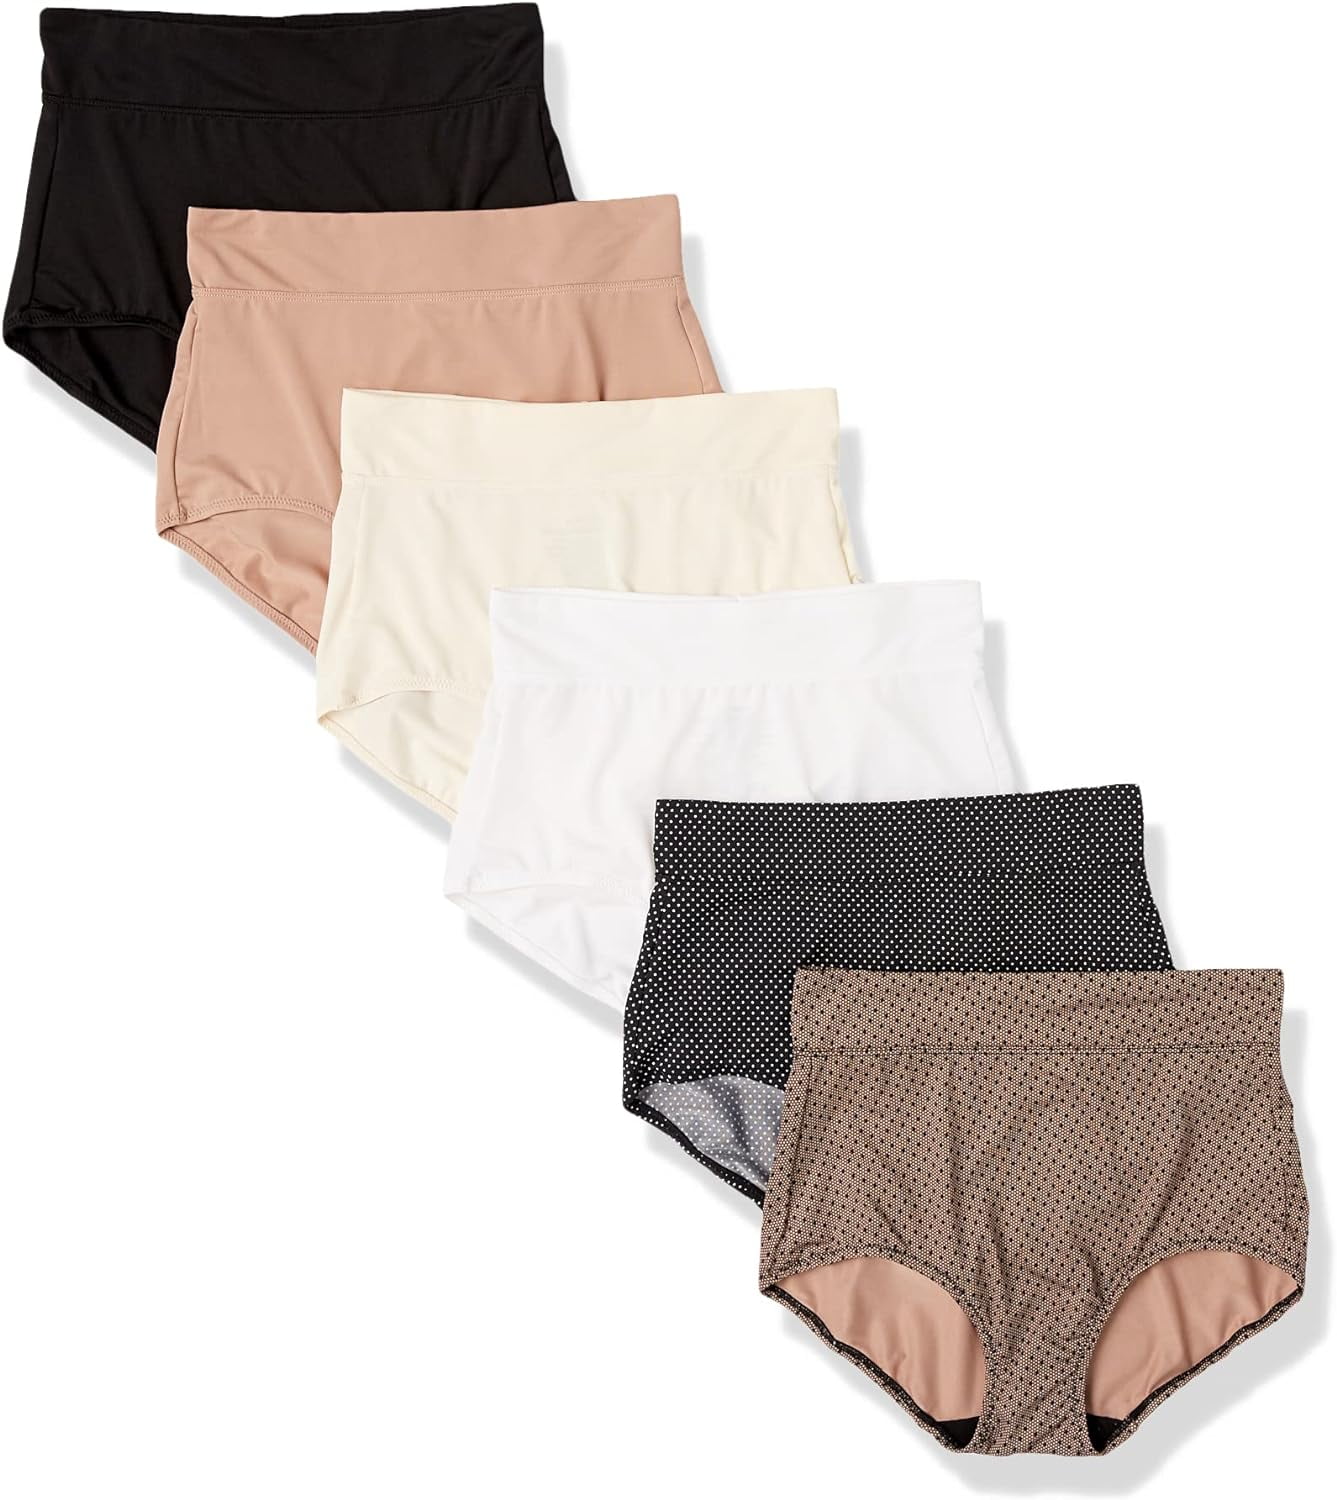 Warners® Blissful Benefits Dig-Free Comfort Waistband Microfiber Brief  6-Pack RS9046W 